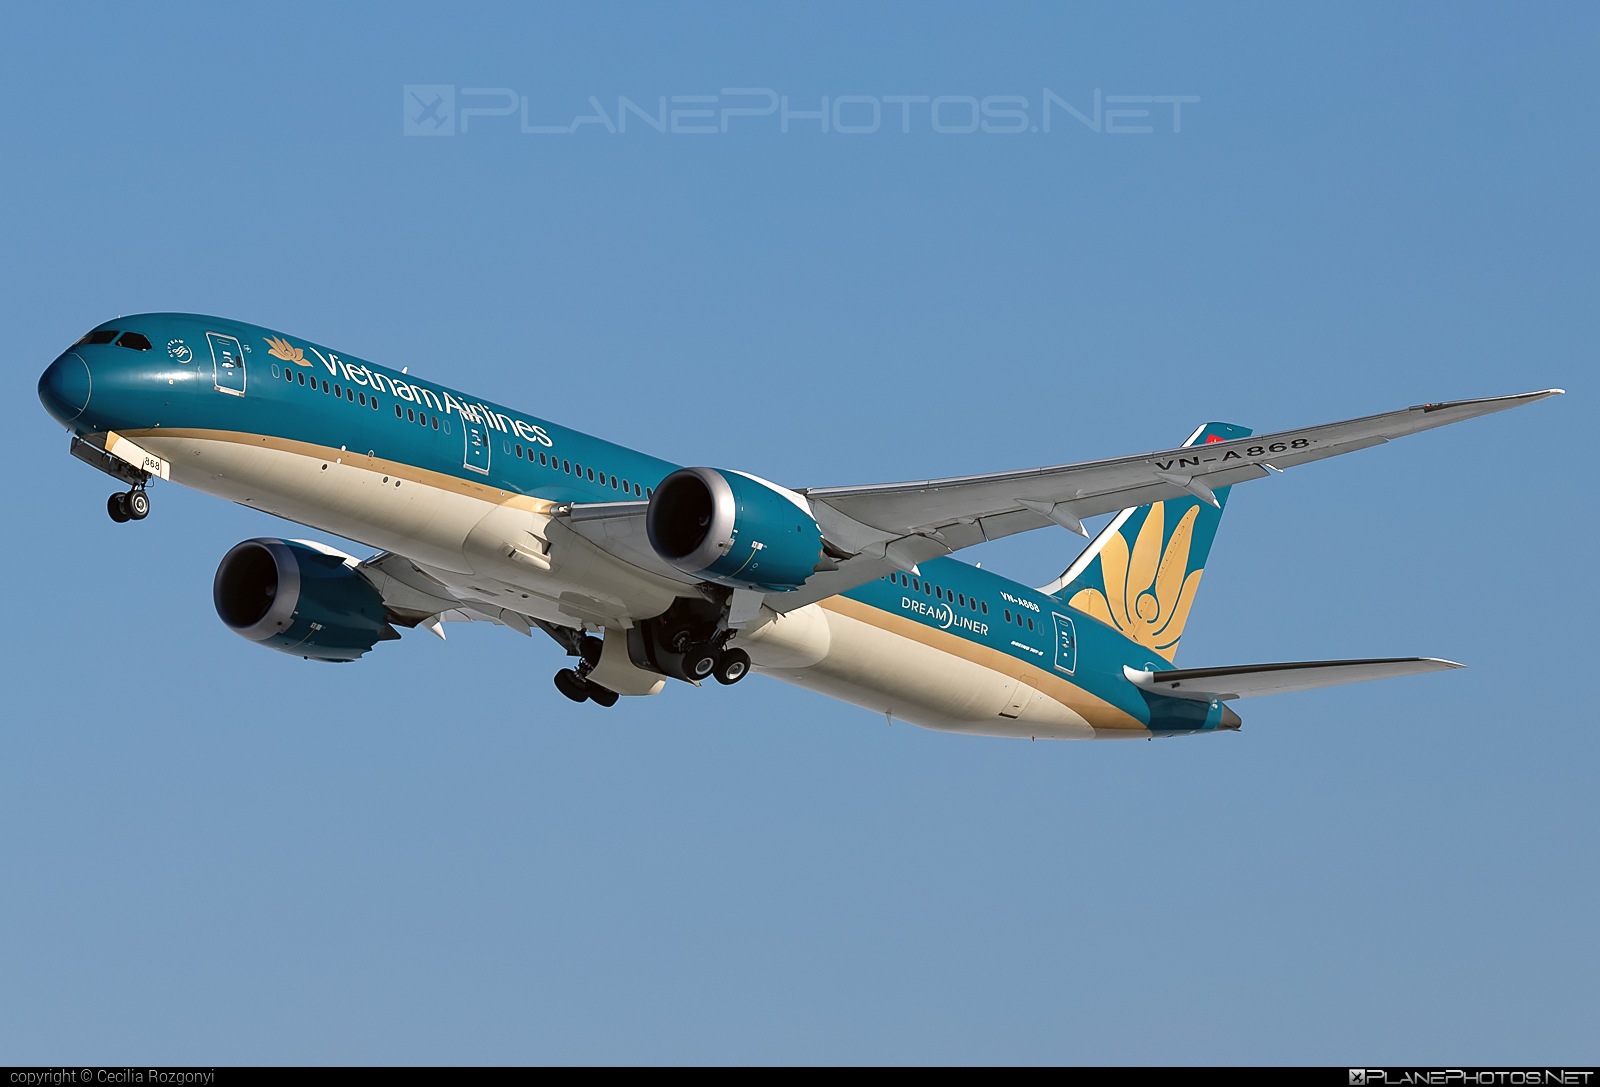 Boeing 787-9 Dreamliner - VN-A868 operated by Vietnam Airlines #b787 #boeing #boeing787 #dreamliner